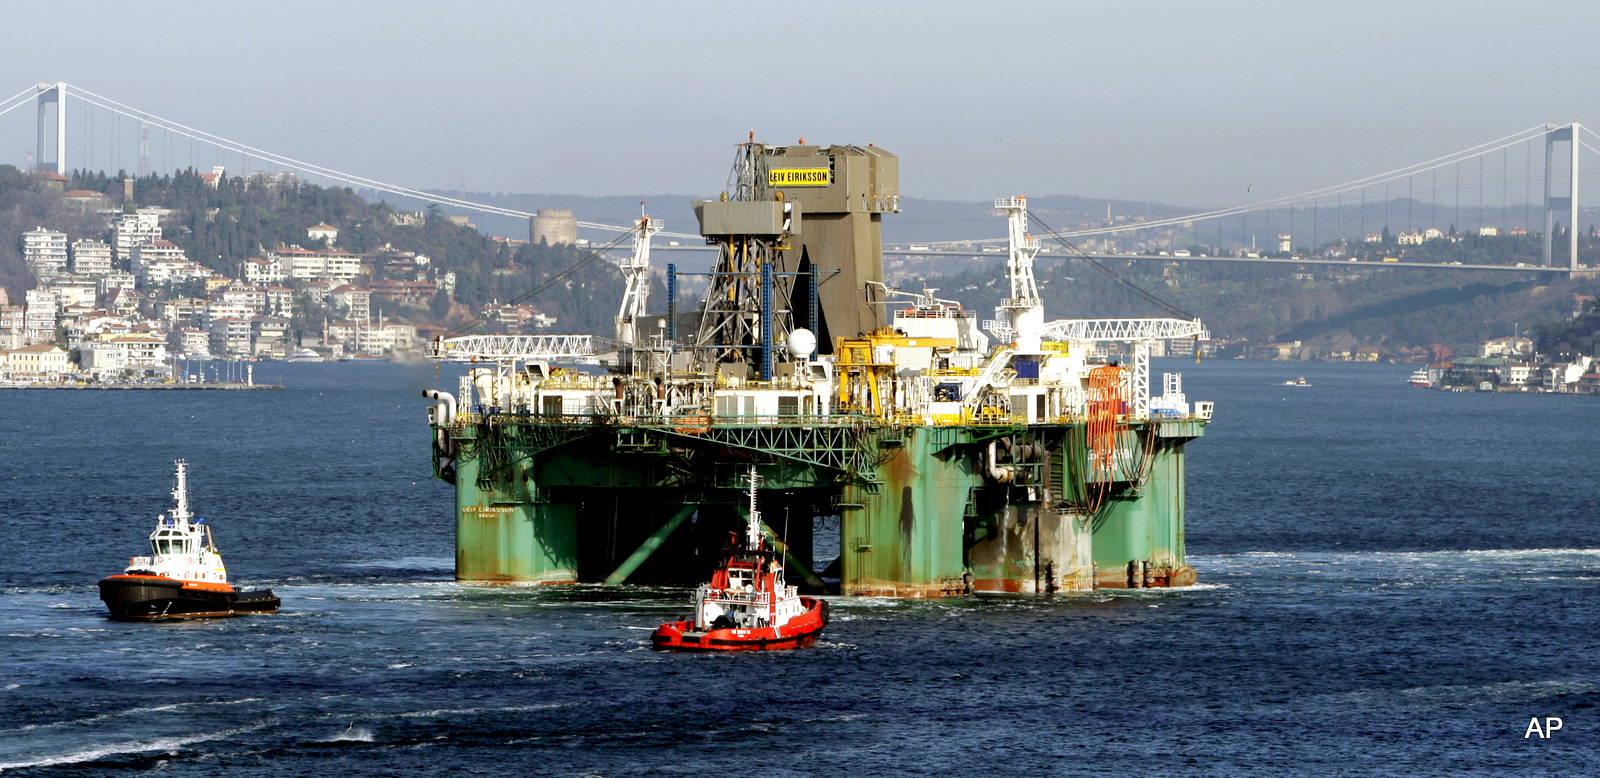 The Leiv Eiriksson, one of the world's largest rigs, makes its way crossing the Istanbul's narrow Bosporus Strait to the Black Sea, in Istanbul, Turkey, Thursday, Dec. 31, 2009. 